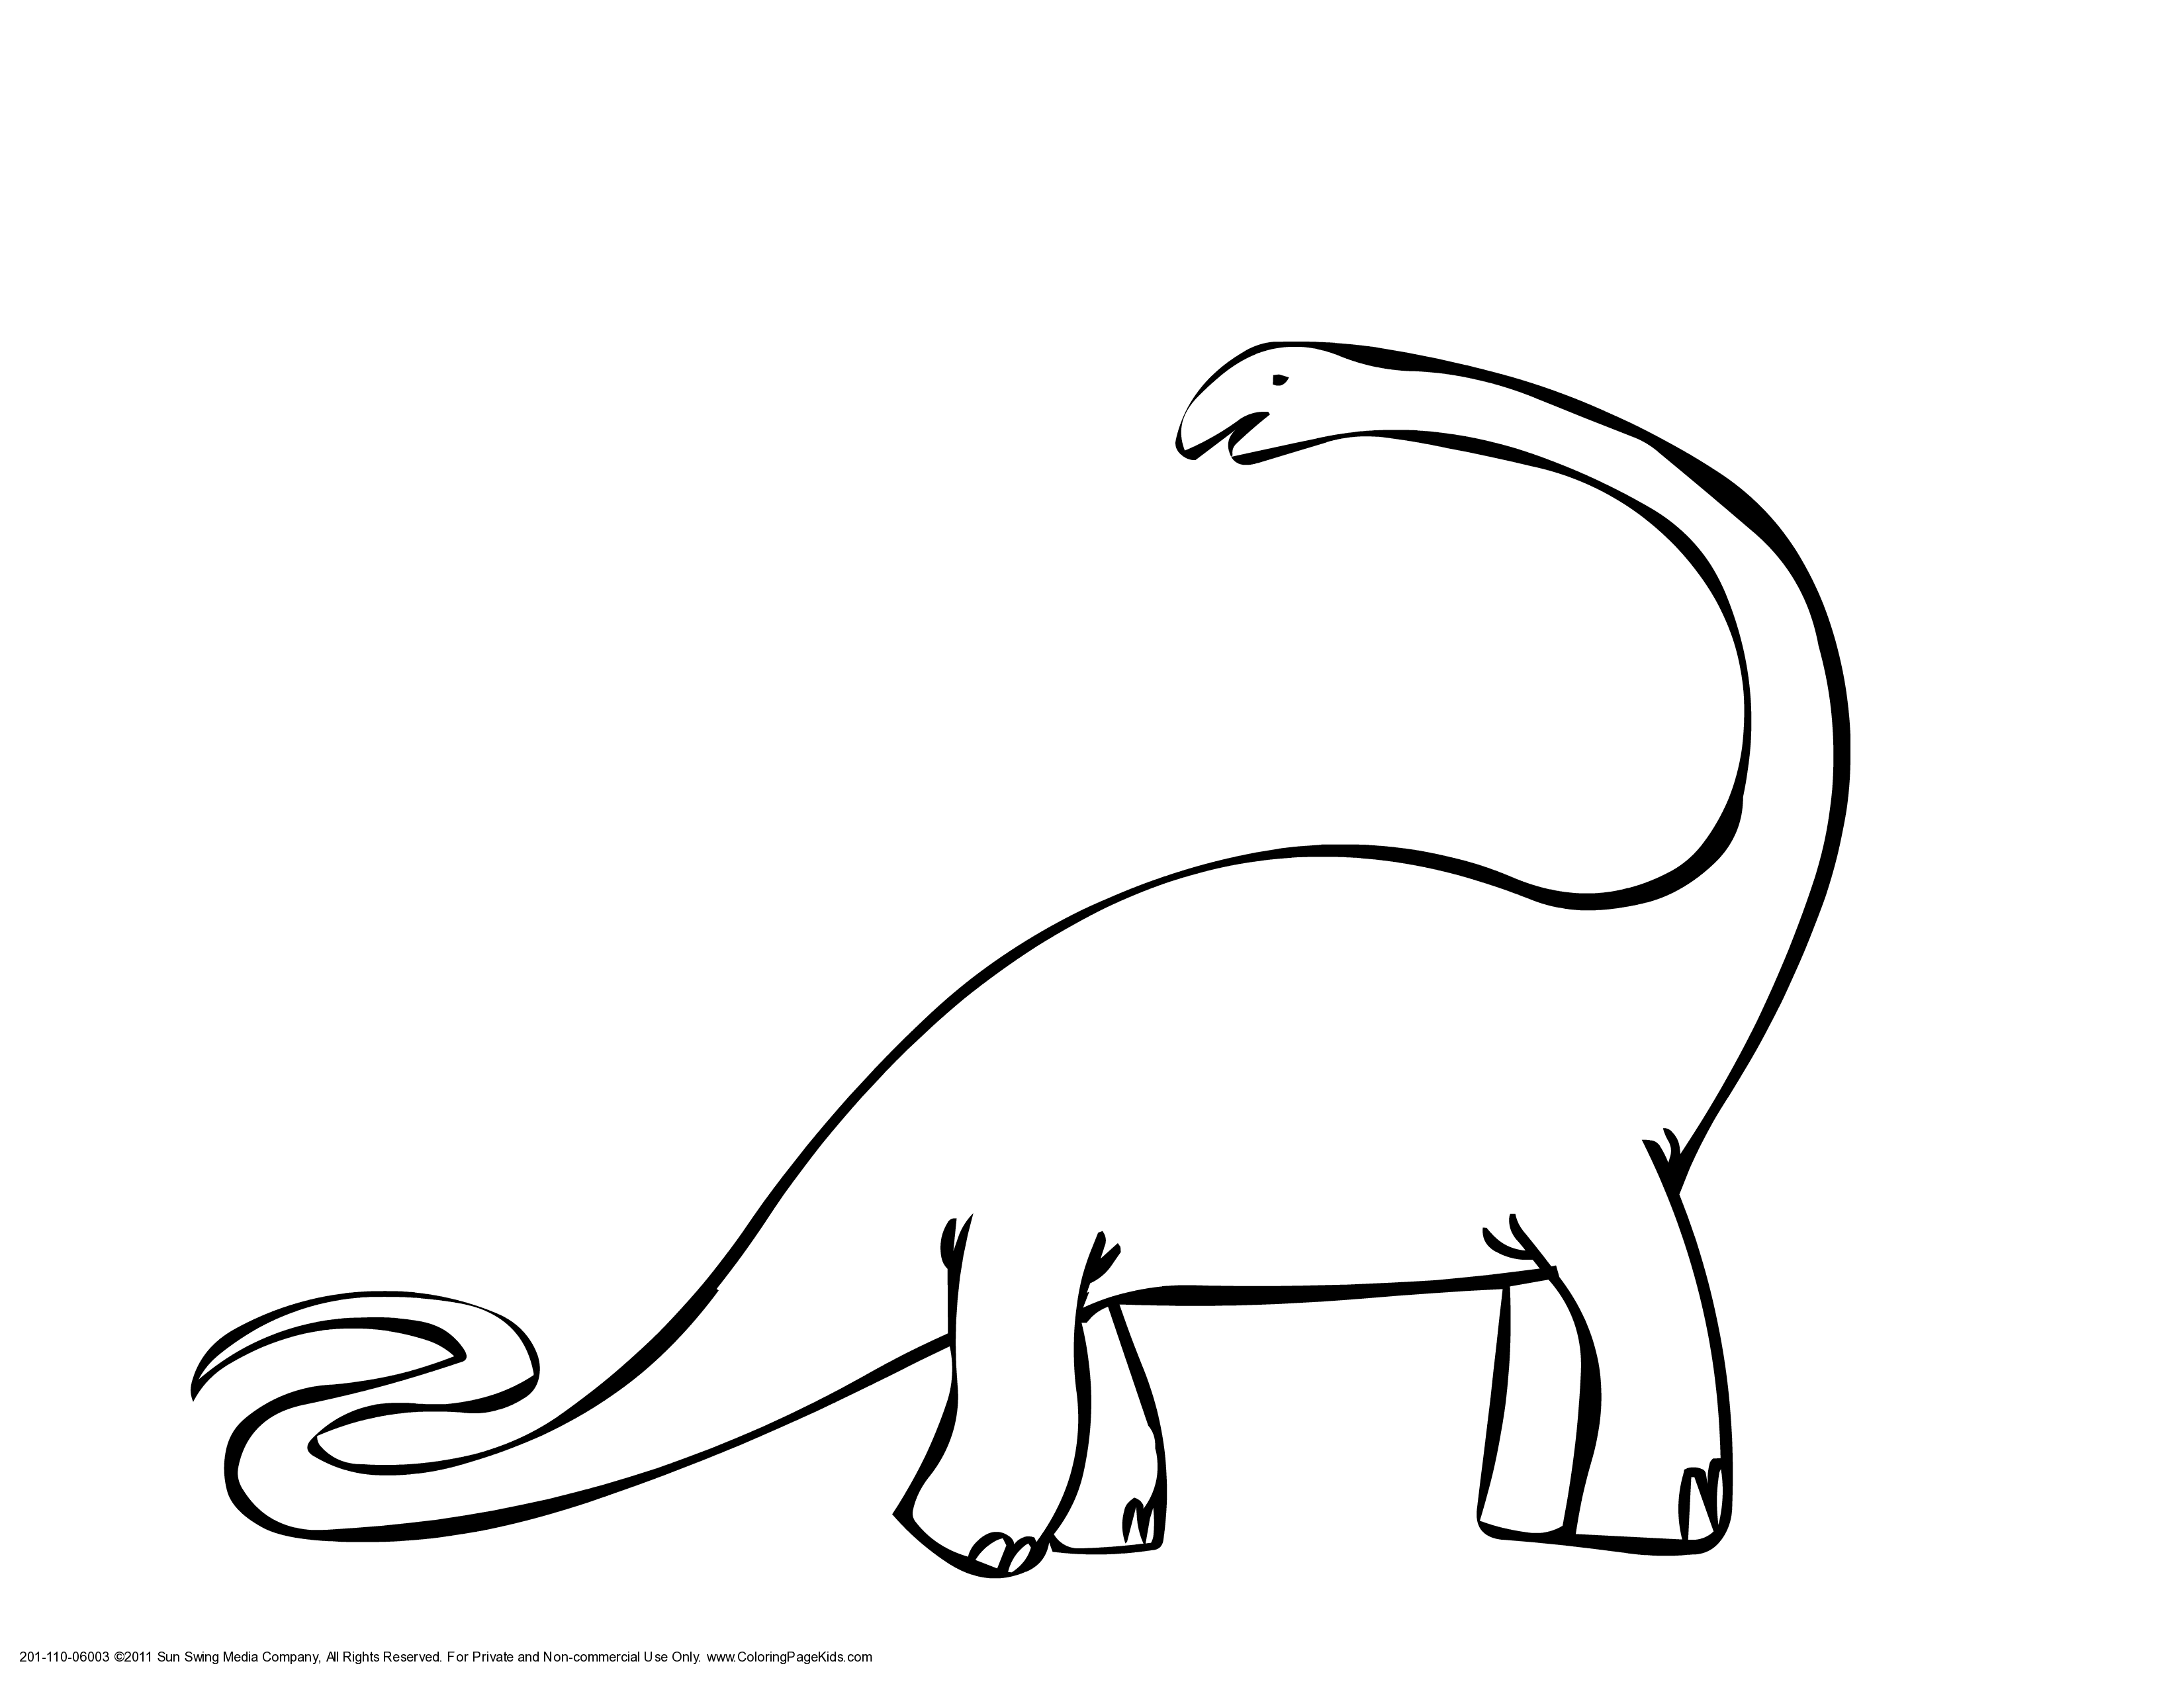 10 Brontosaurus Outline Free Cliparts That You Can Download To You